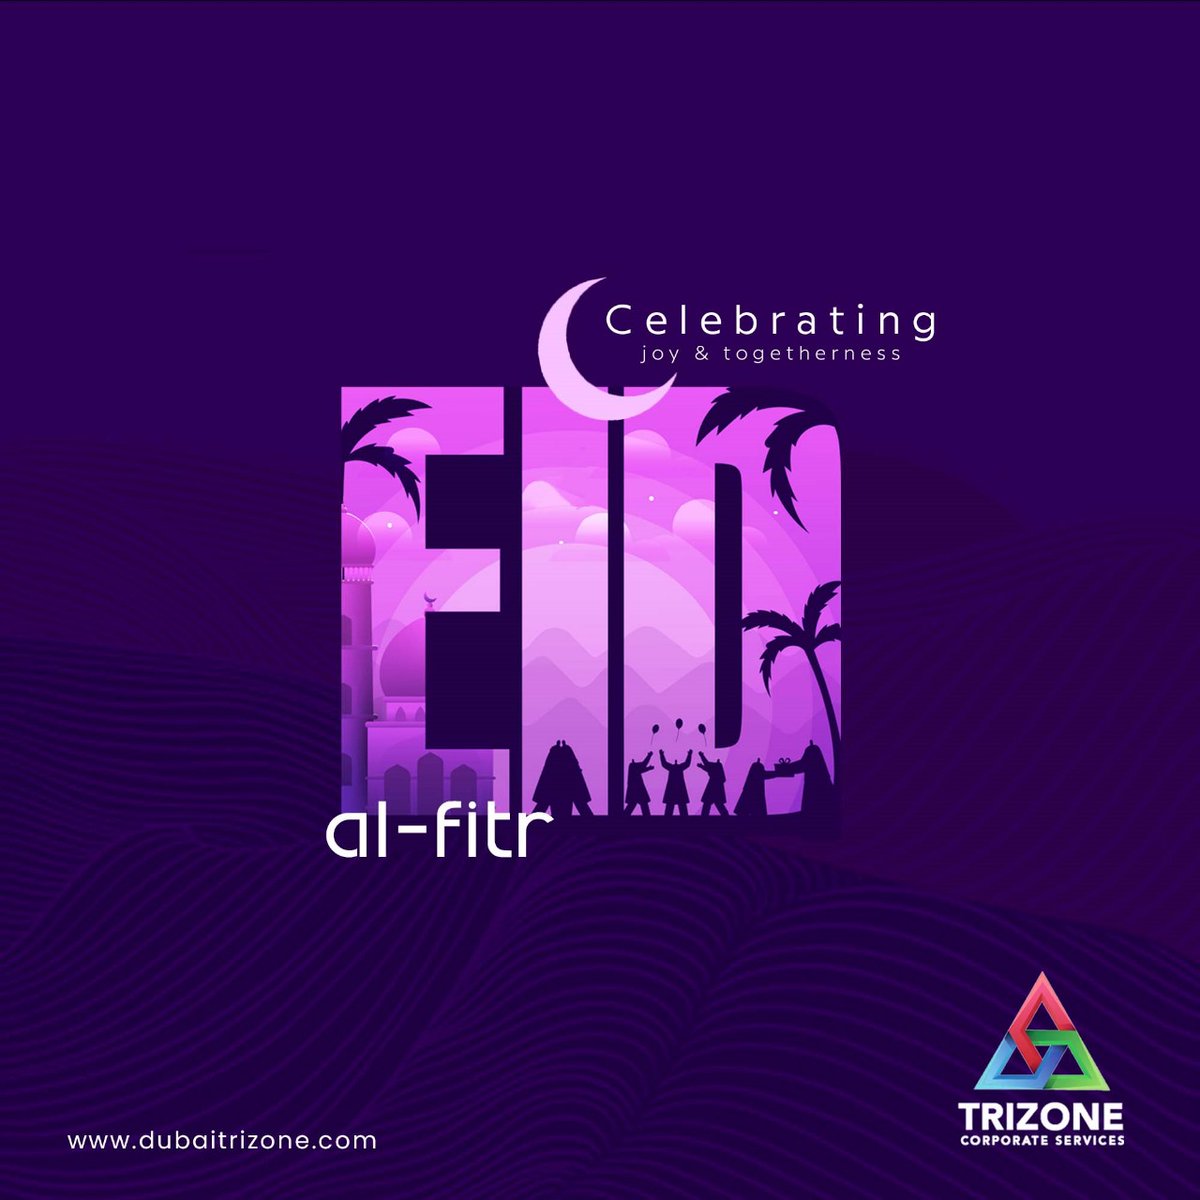 Eid Mubarak from Trizone!  Wishing you and your loved ones joy, prosperity, and blessings this Eid. As you celebrate, may your business endeavors thrive and your aspirations reach new heights. 

#EidMubarak #TrizoneConsultancy #DubaiBusines  #BlessingsAndProsperity'